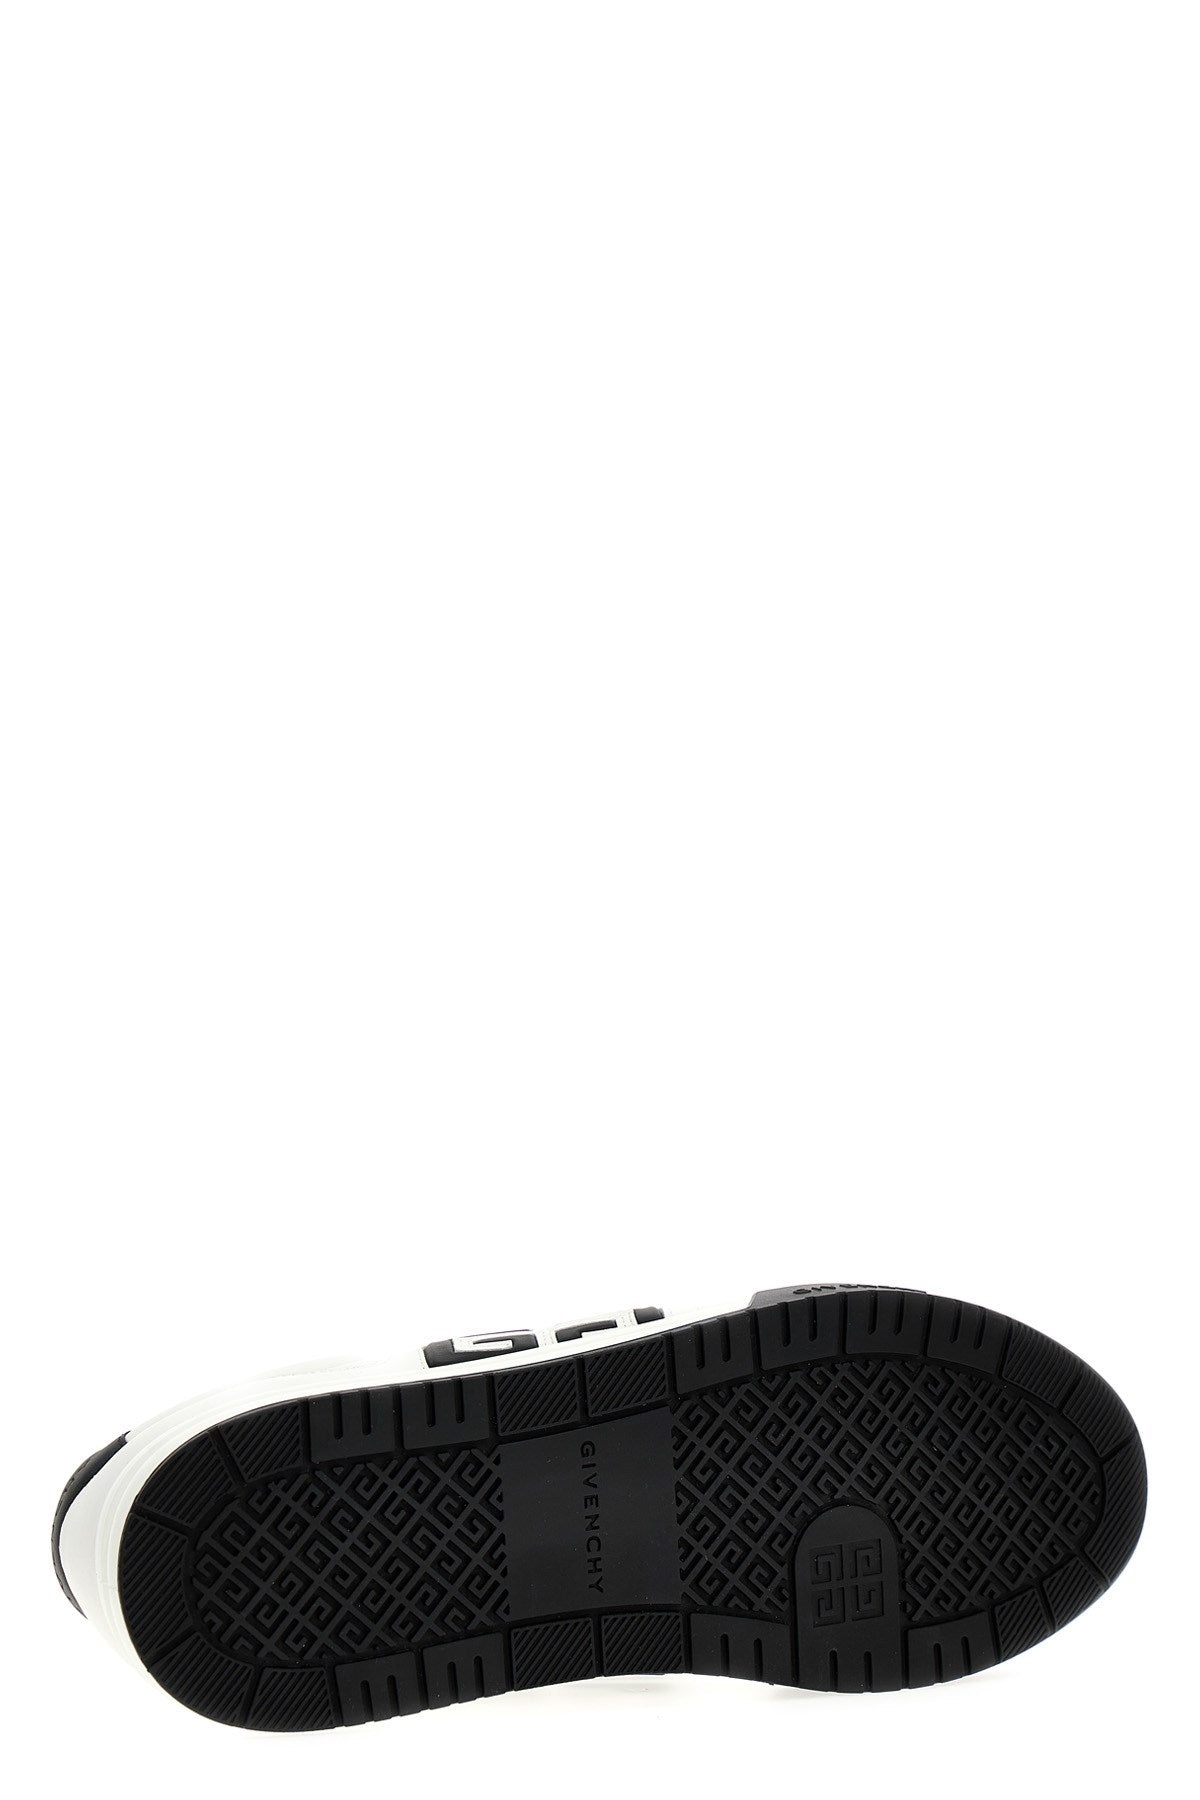 Givenchy Men 'G4' Sneakers - 3